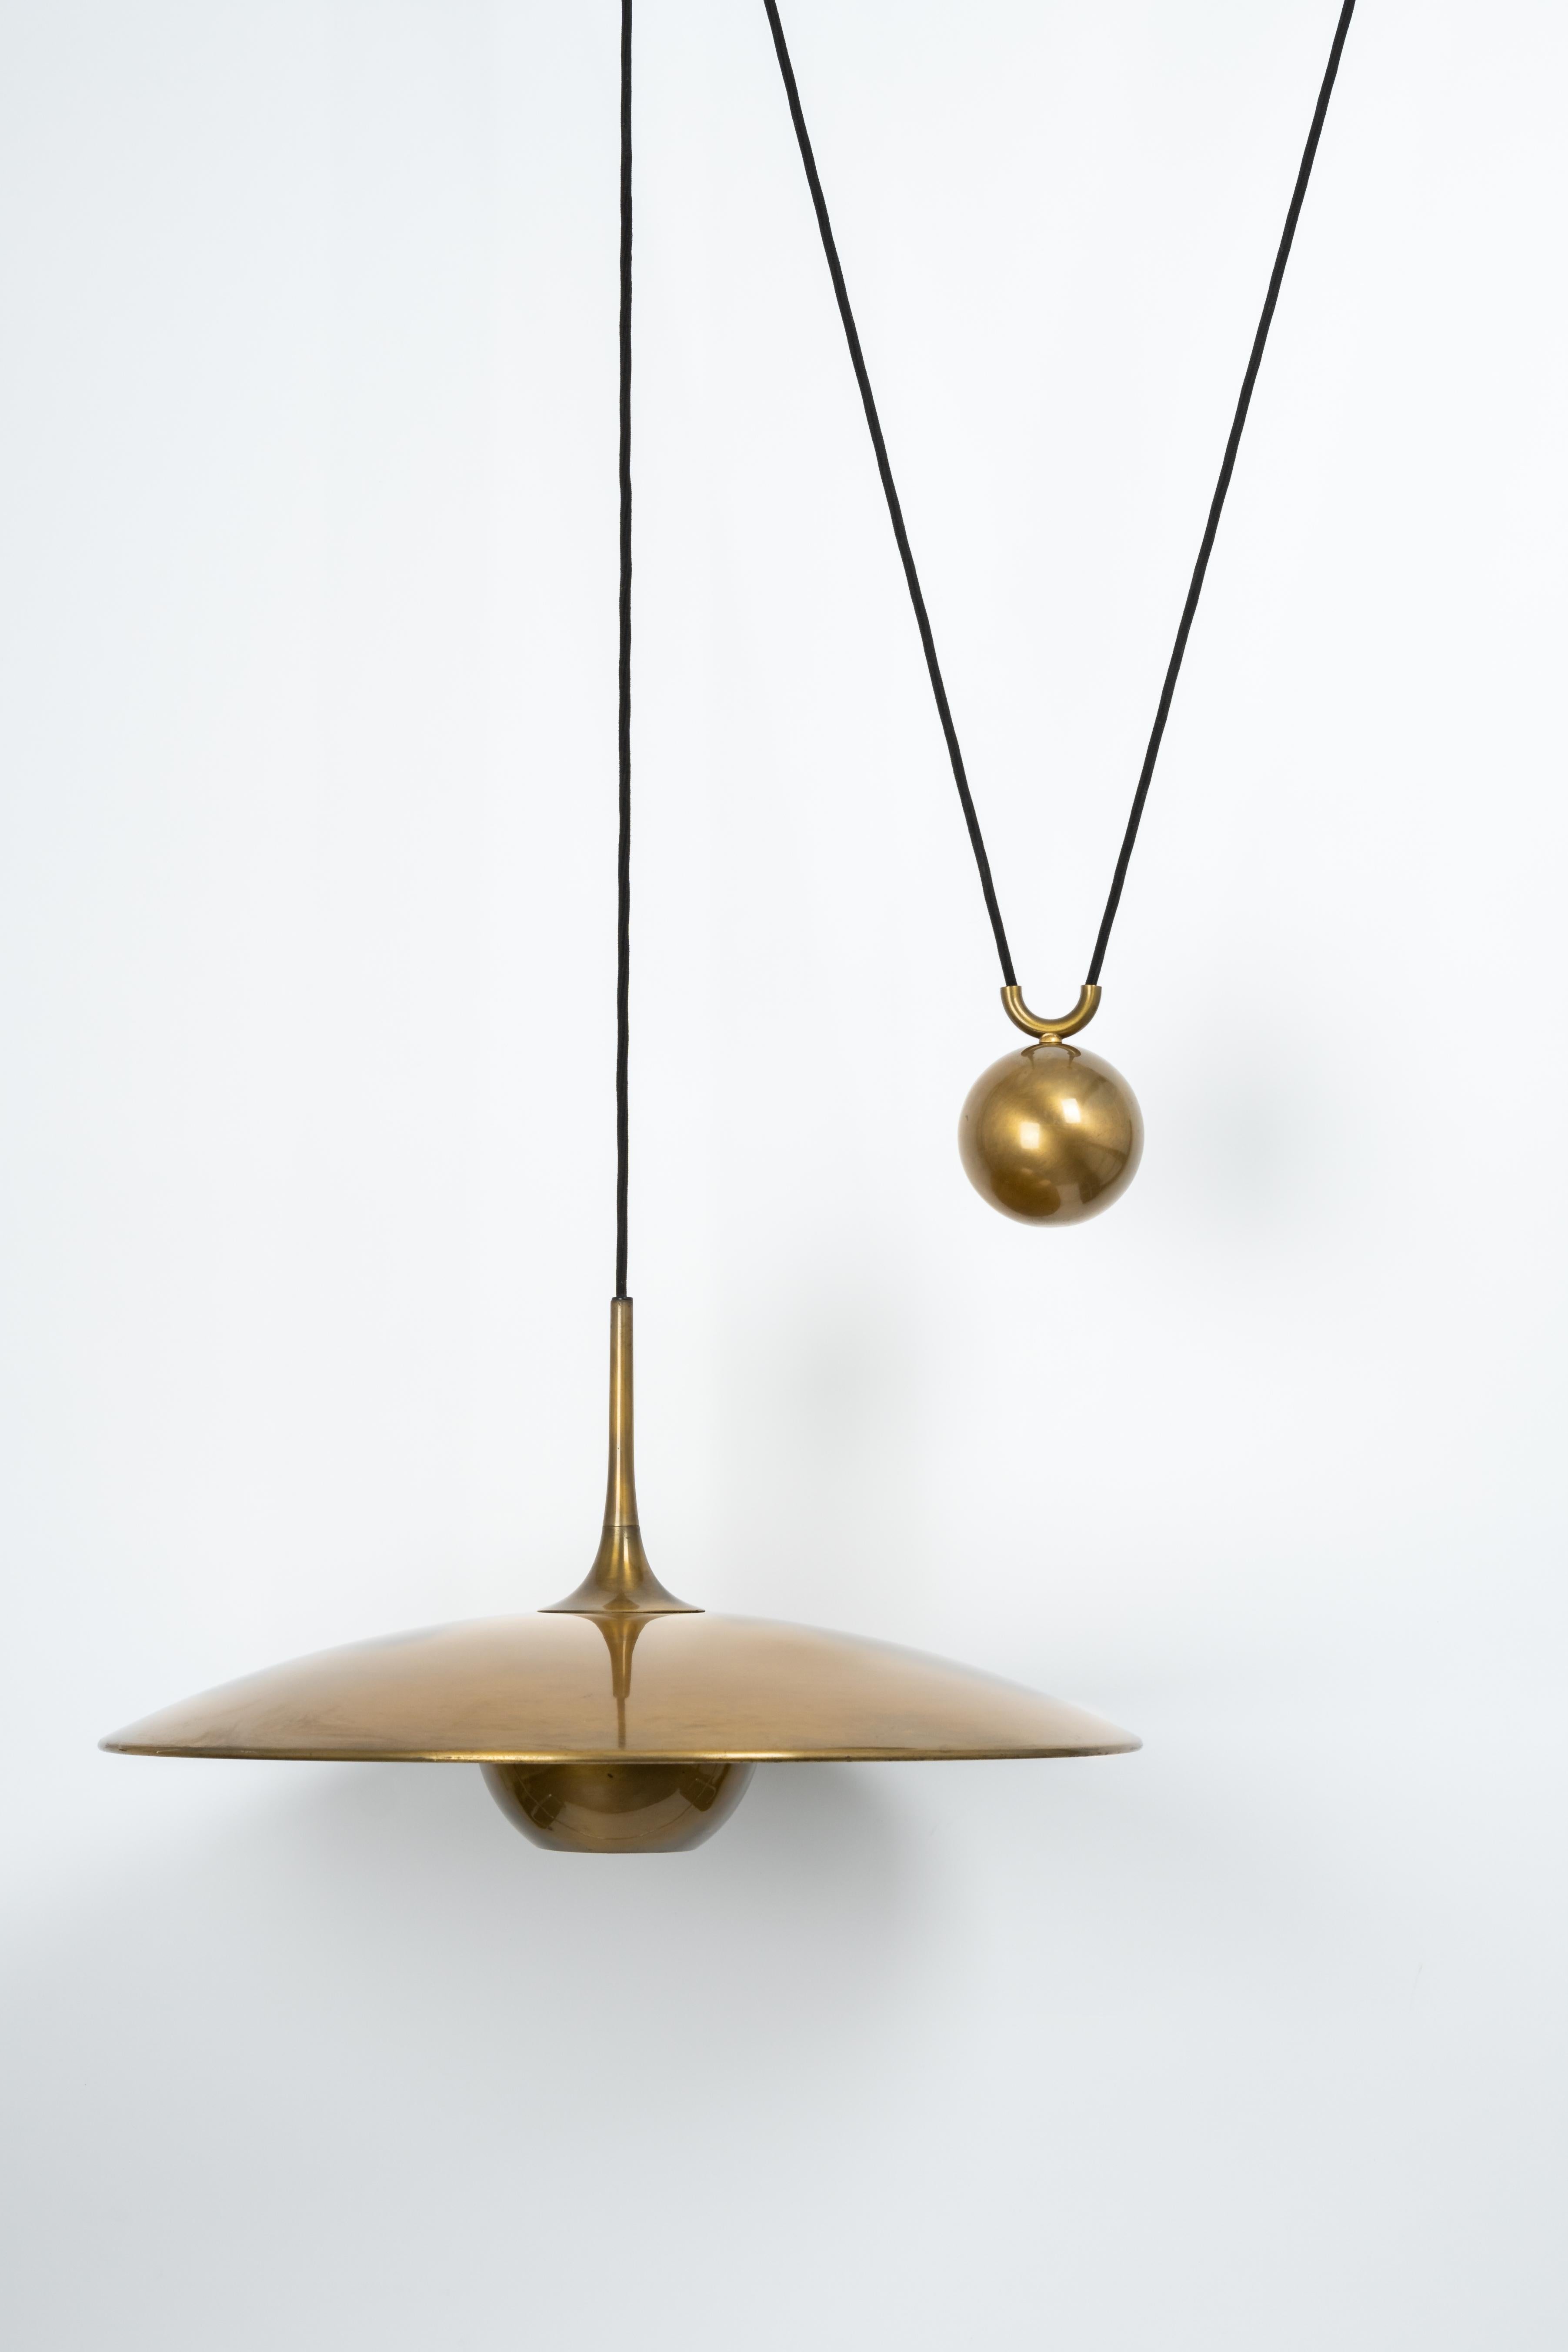 Large Adjustable Brass Counterweight Pendant Light by Florian Schulz, Germany 1